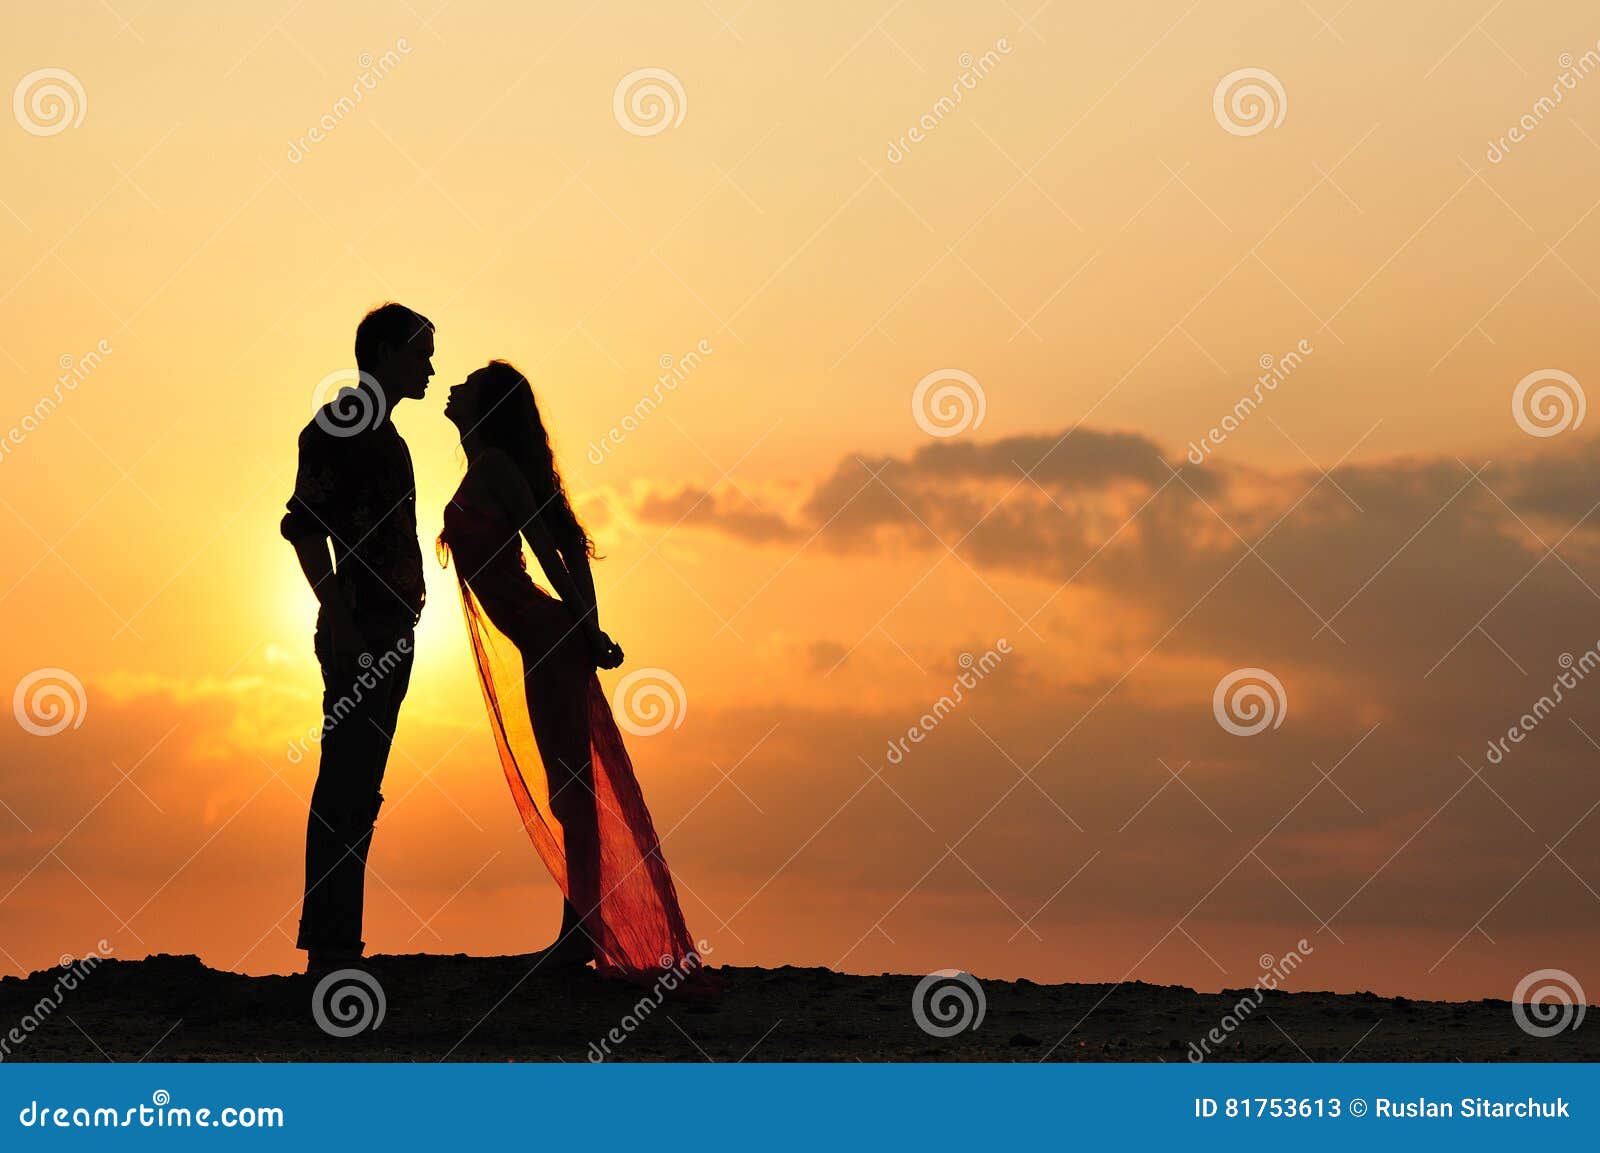 Silhouette Of A Girl And Boy At Sunset Stock Image Image Of Lover Coast